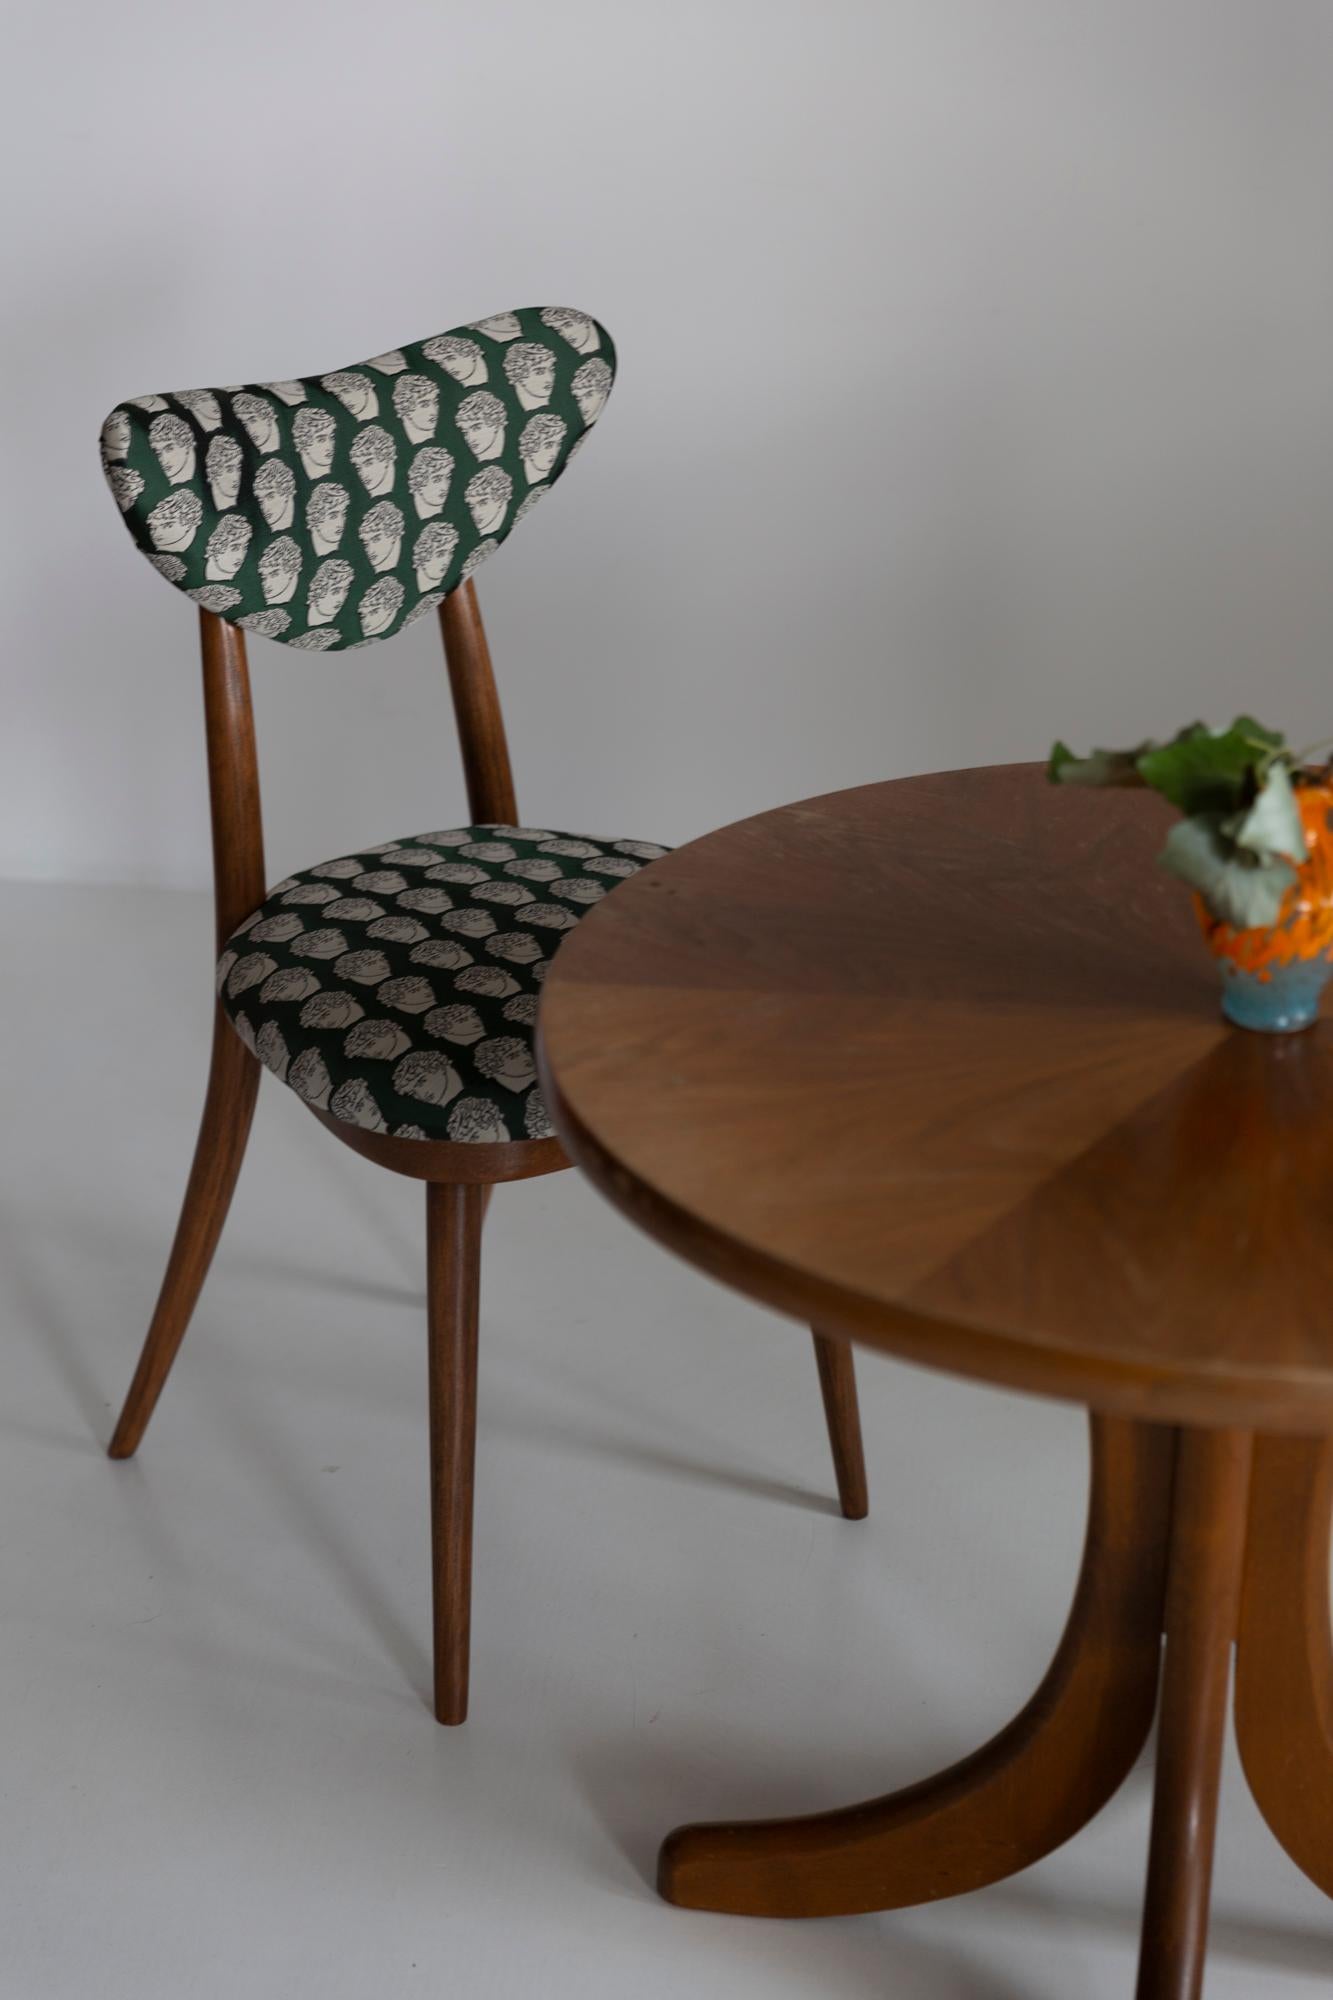 Hand-Crafted Midcentury David Print Emerald Satin, Walnut Wood Heart Chair, Europe, 1960s For Sale